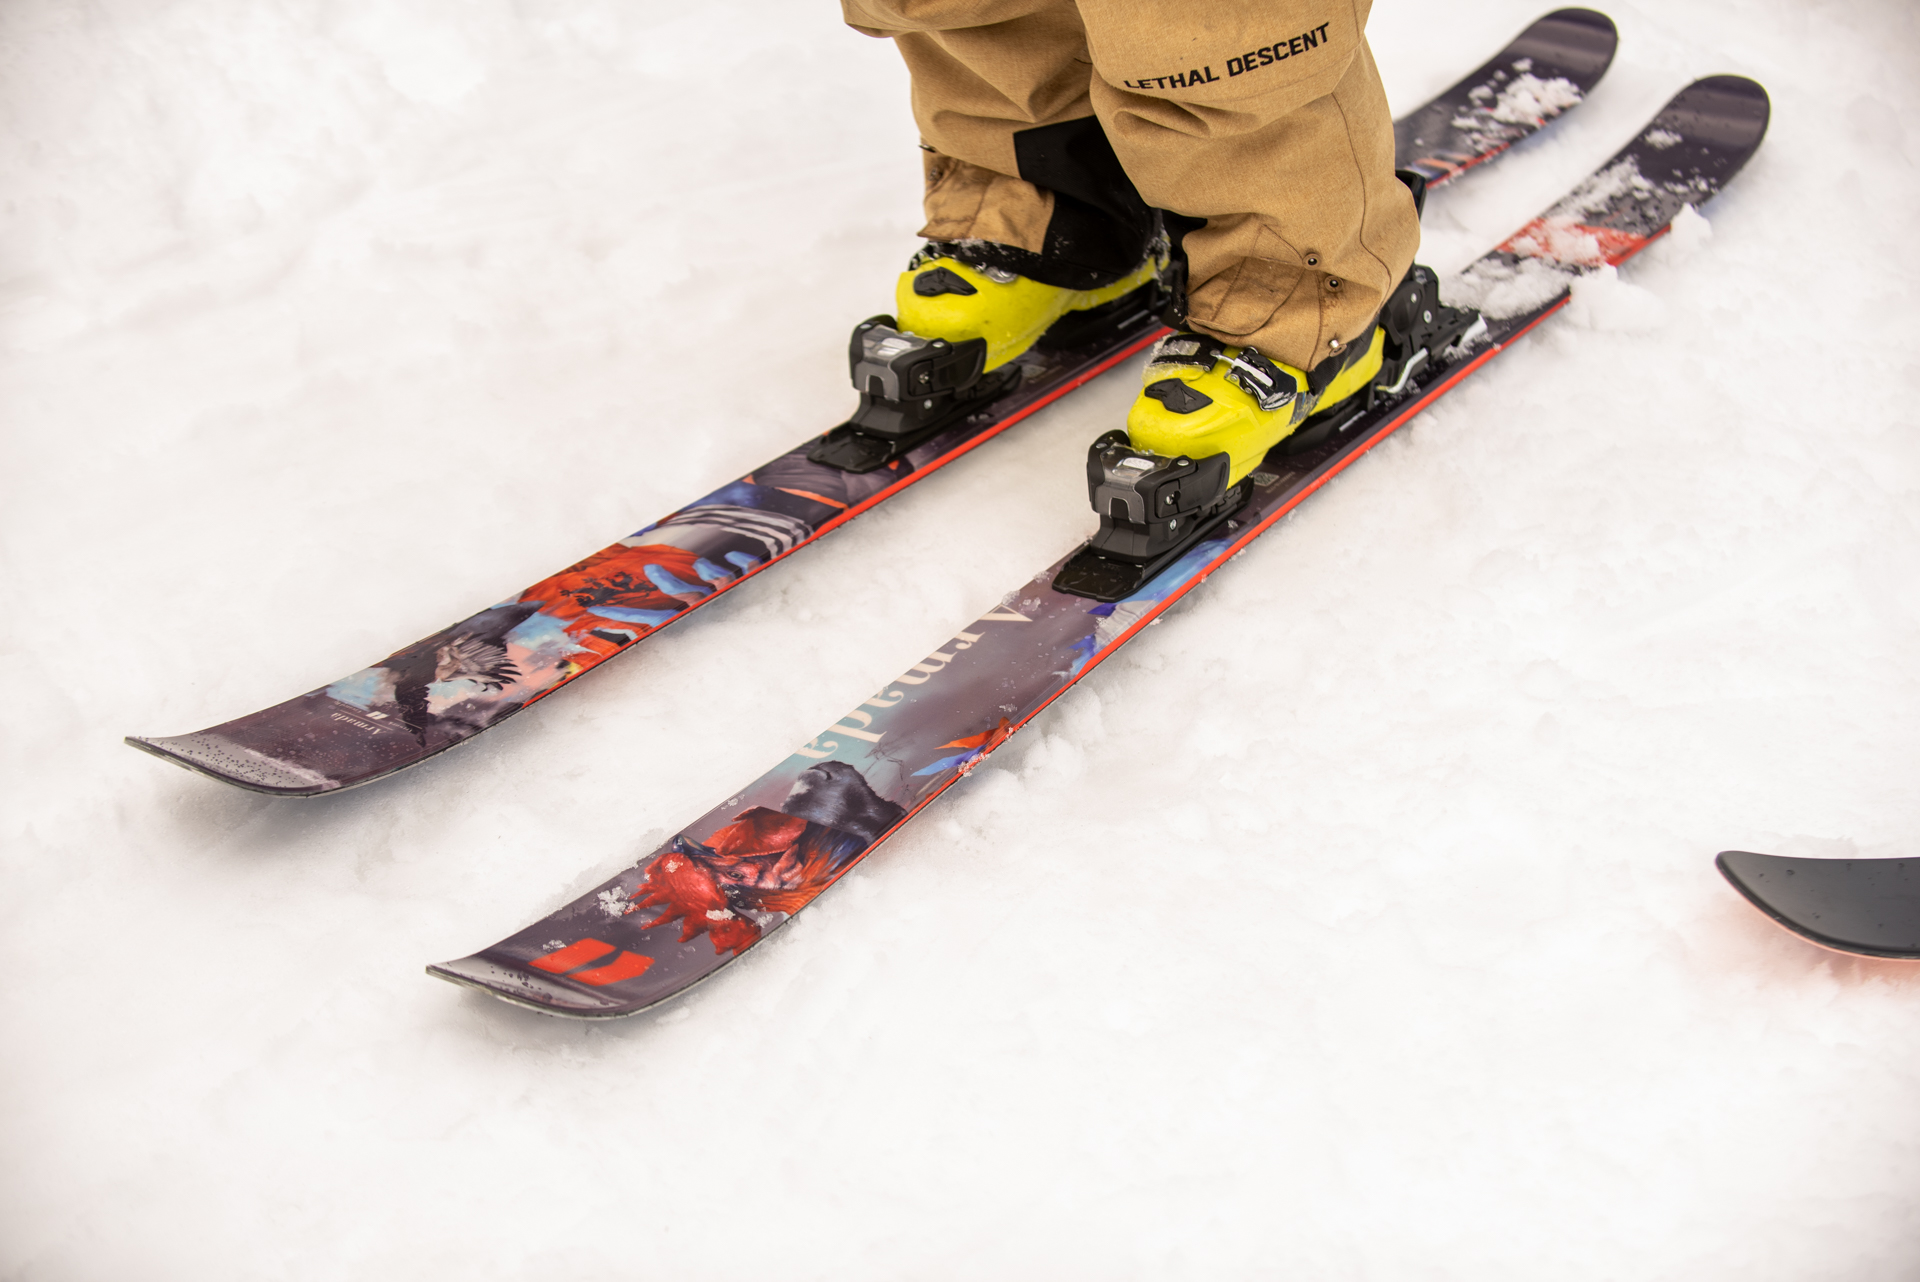 [Gallery] Next year's park, pipe & urban skis, as seen at FREESKIER's ...